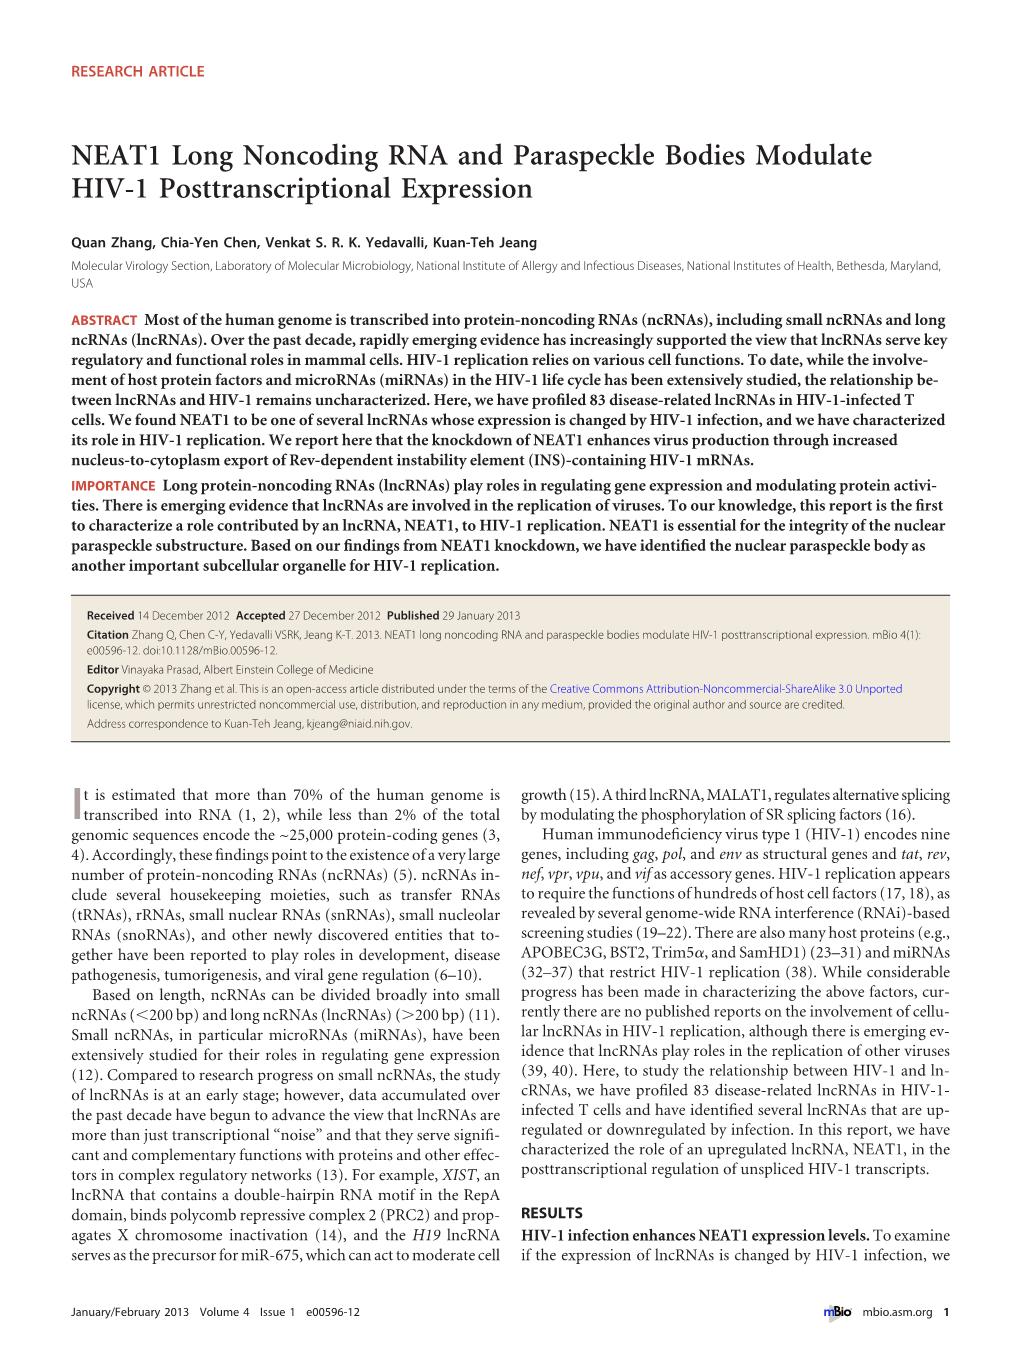 NEAT1 Long Noncoding RNA and Paraspeckle Bodies Modulate HIV-1 Posttranscriptional Expression